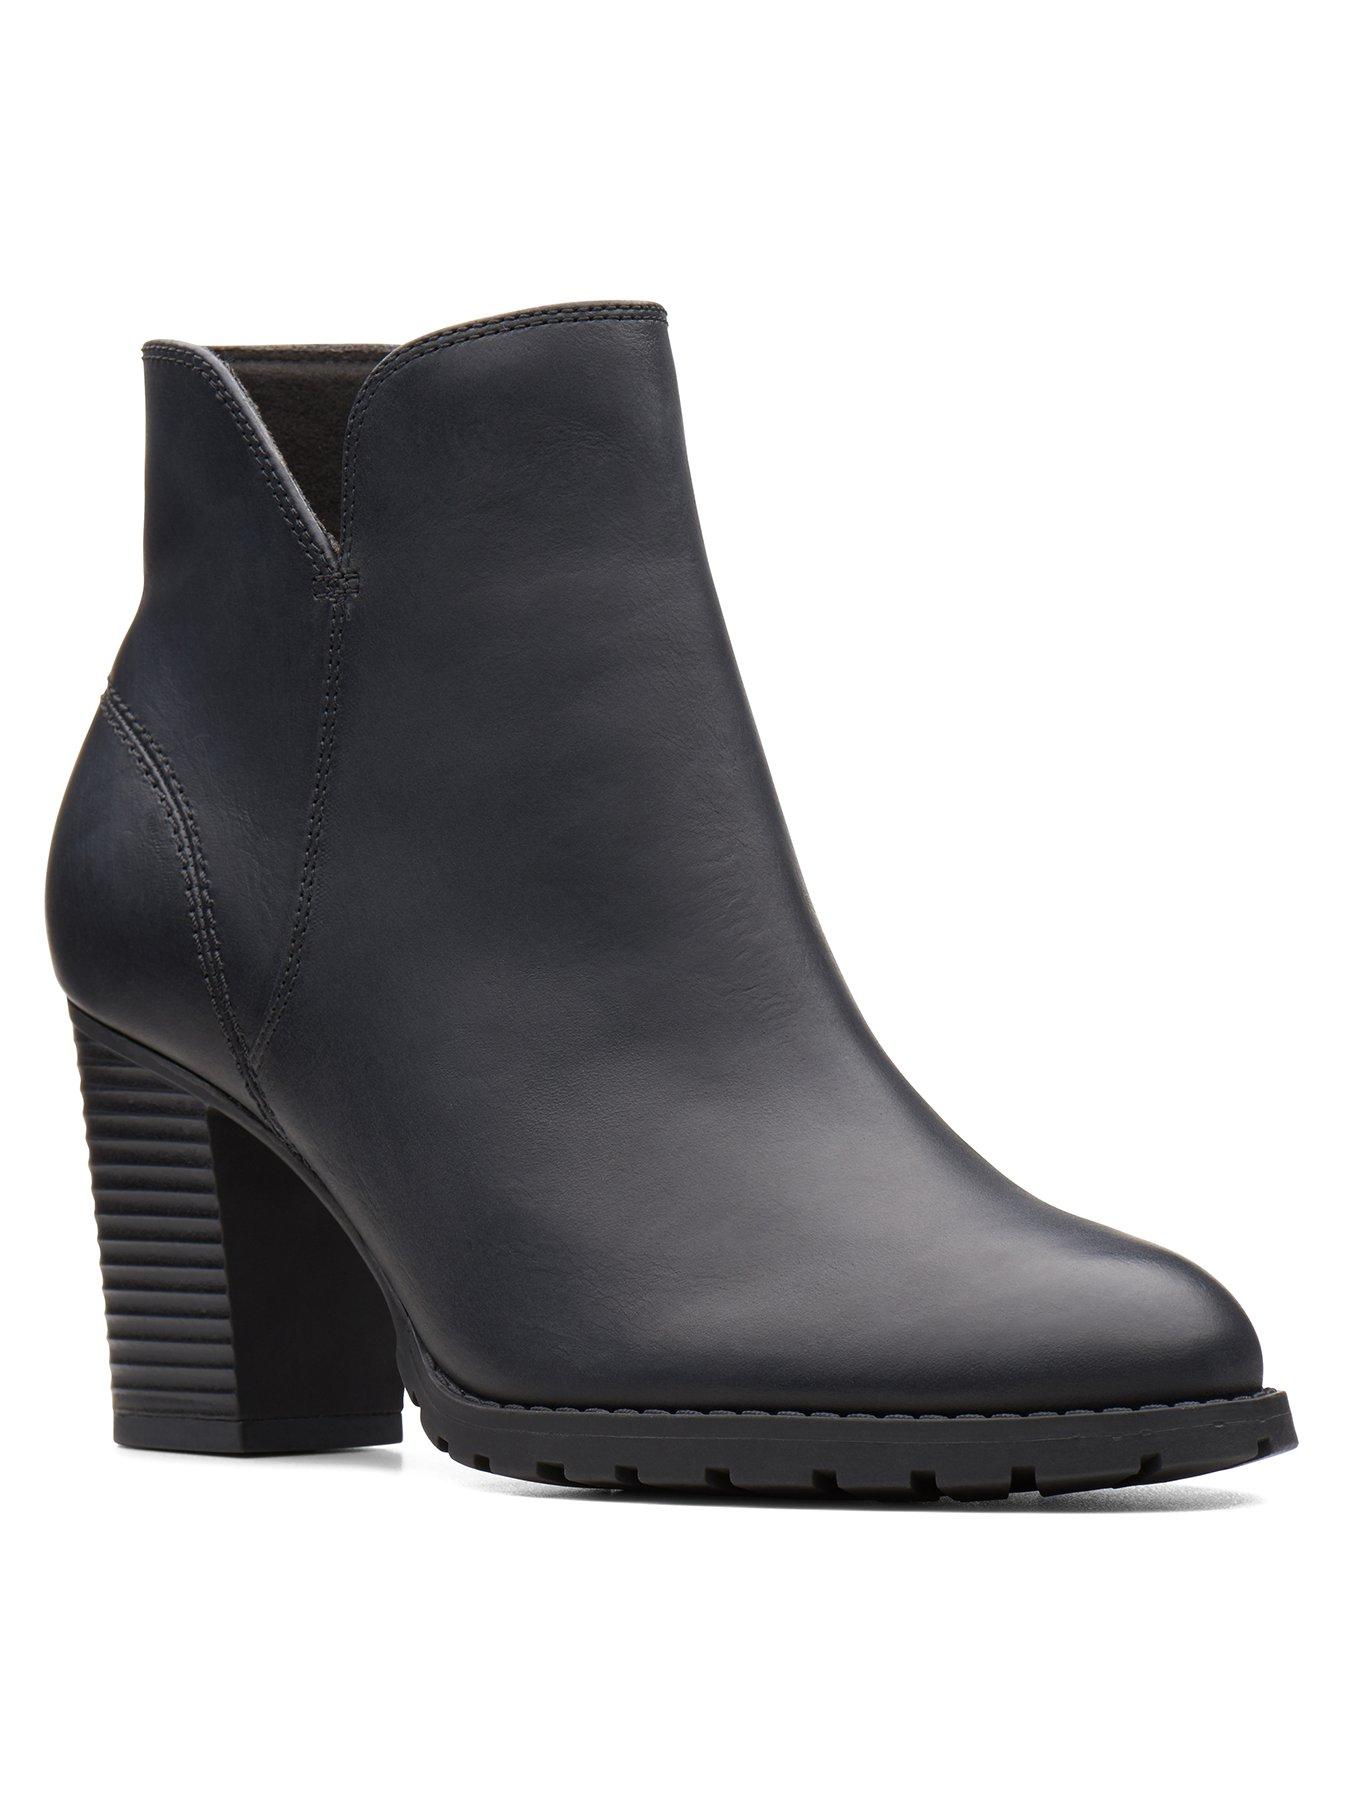 clarks ankle boots ireland